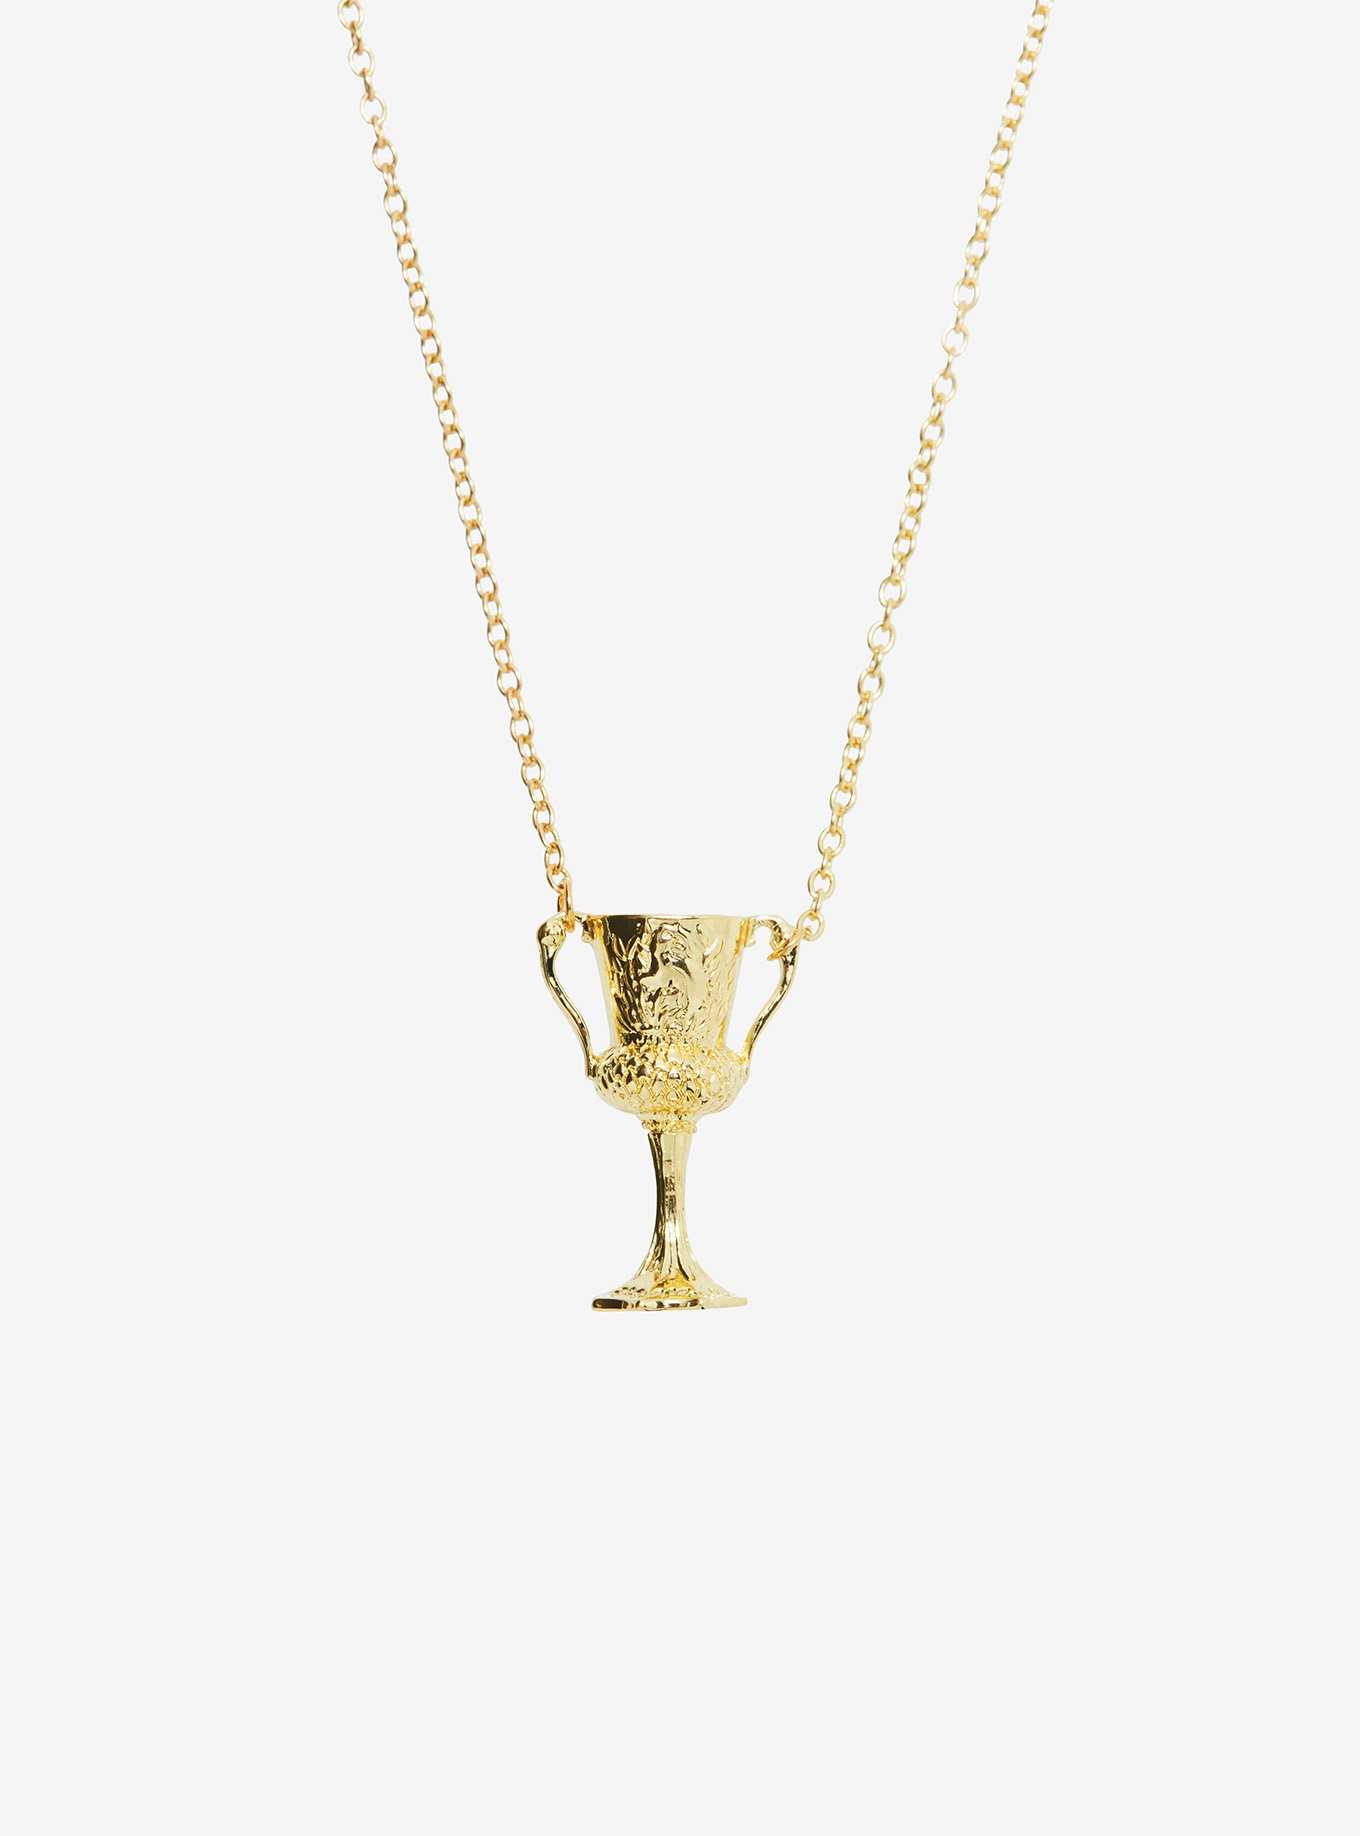 Harry Potter Hufflepuff Cup Necklace, , hi-res